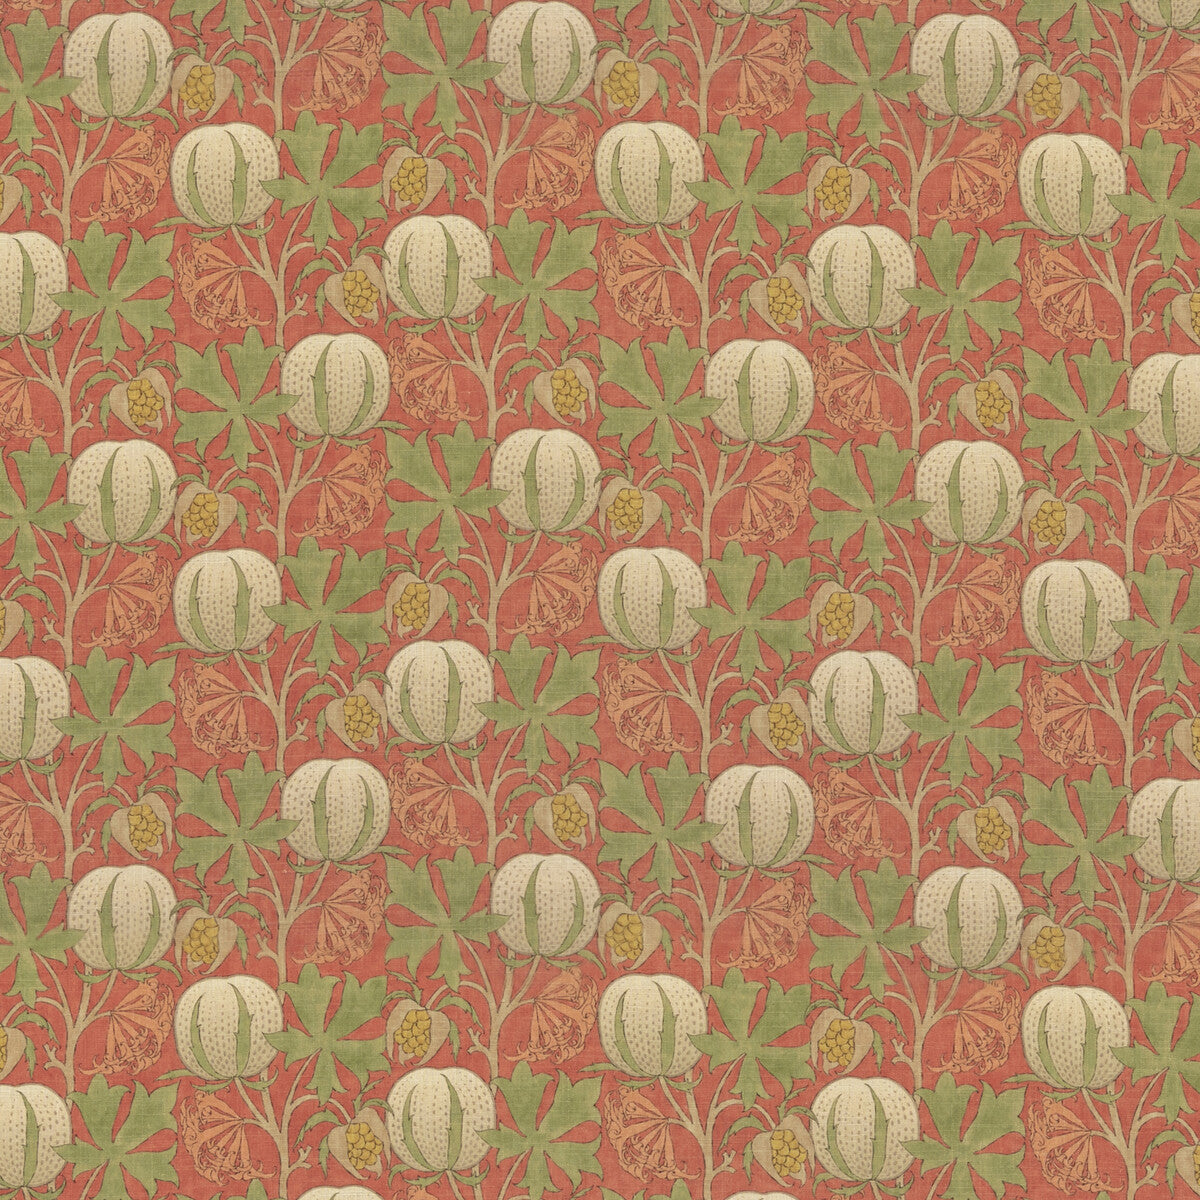 Pumpkins fabric in red/green color - pattern BP10981.1.0 - by G P &amp; J Baker in the Original Brantwood Fabric collection